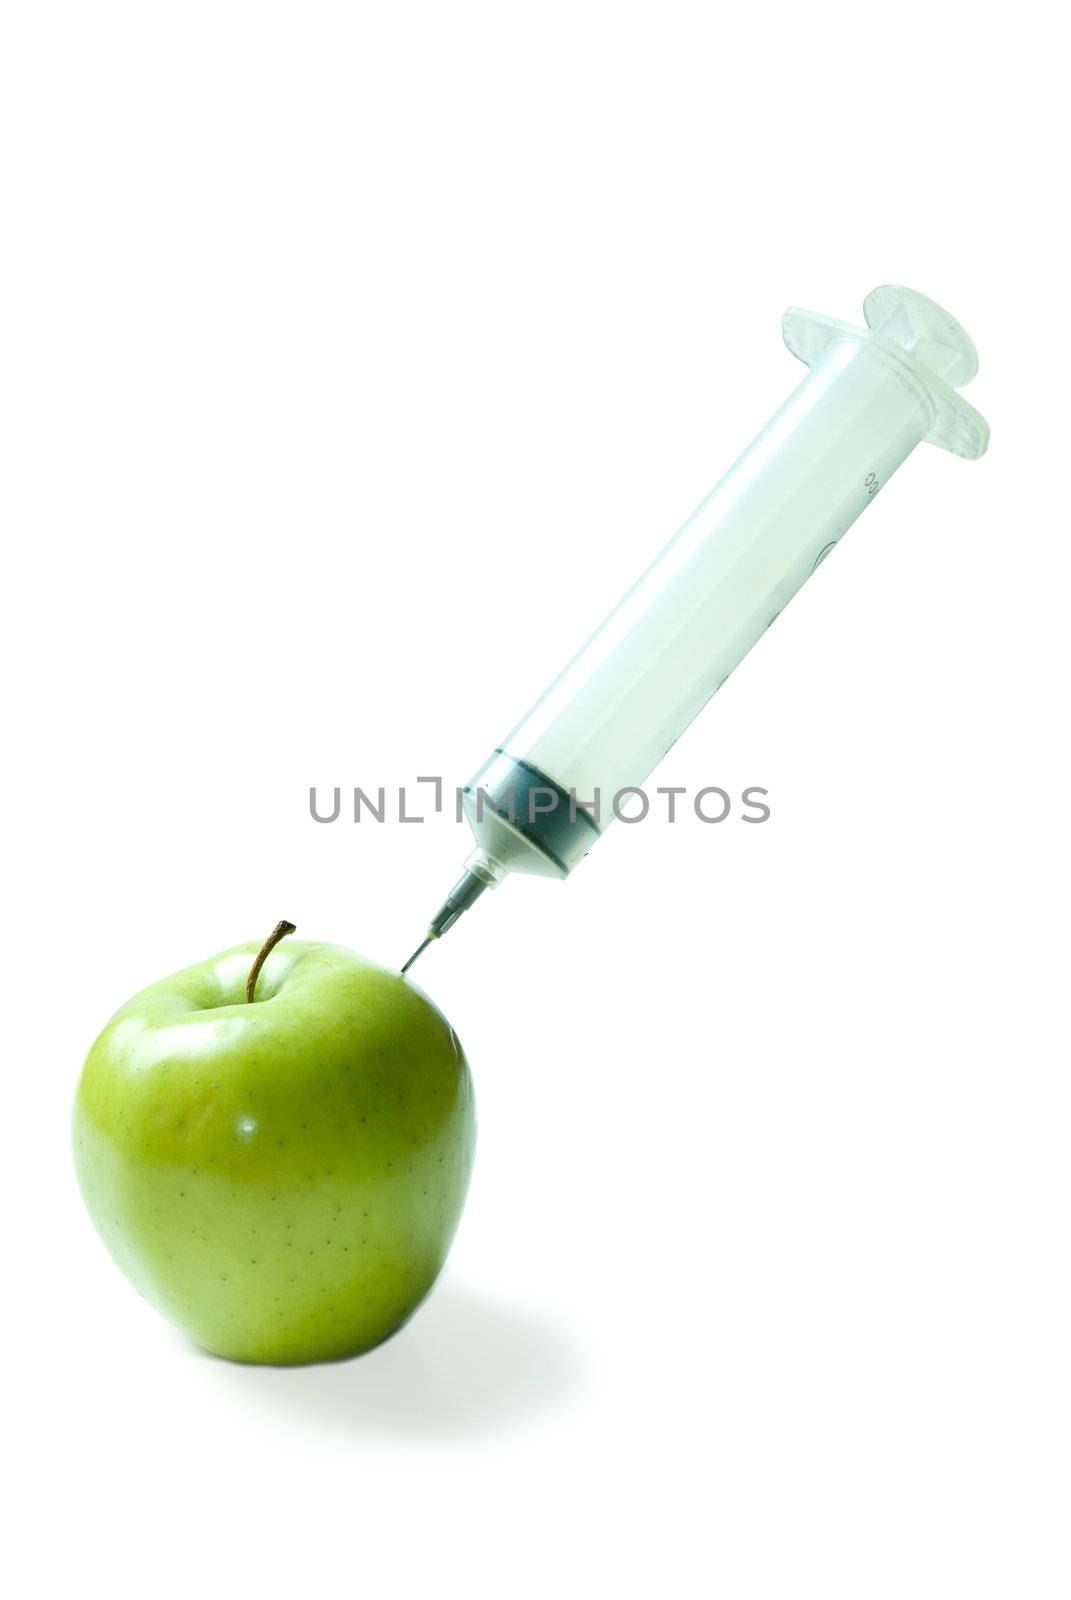 Concept image of a large needle injecting an apple with vitamins, isolated against a white background.